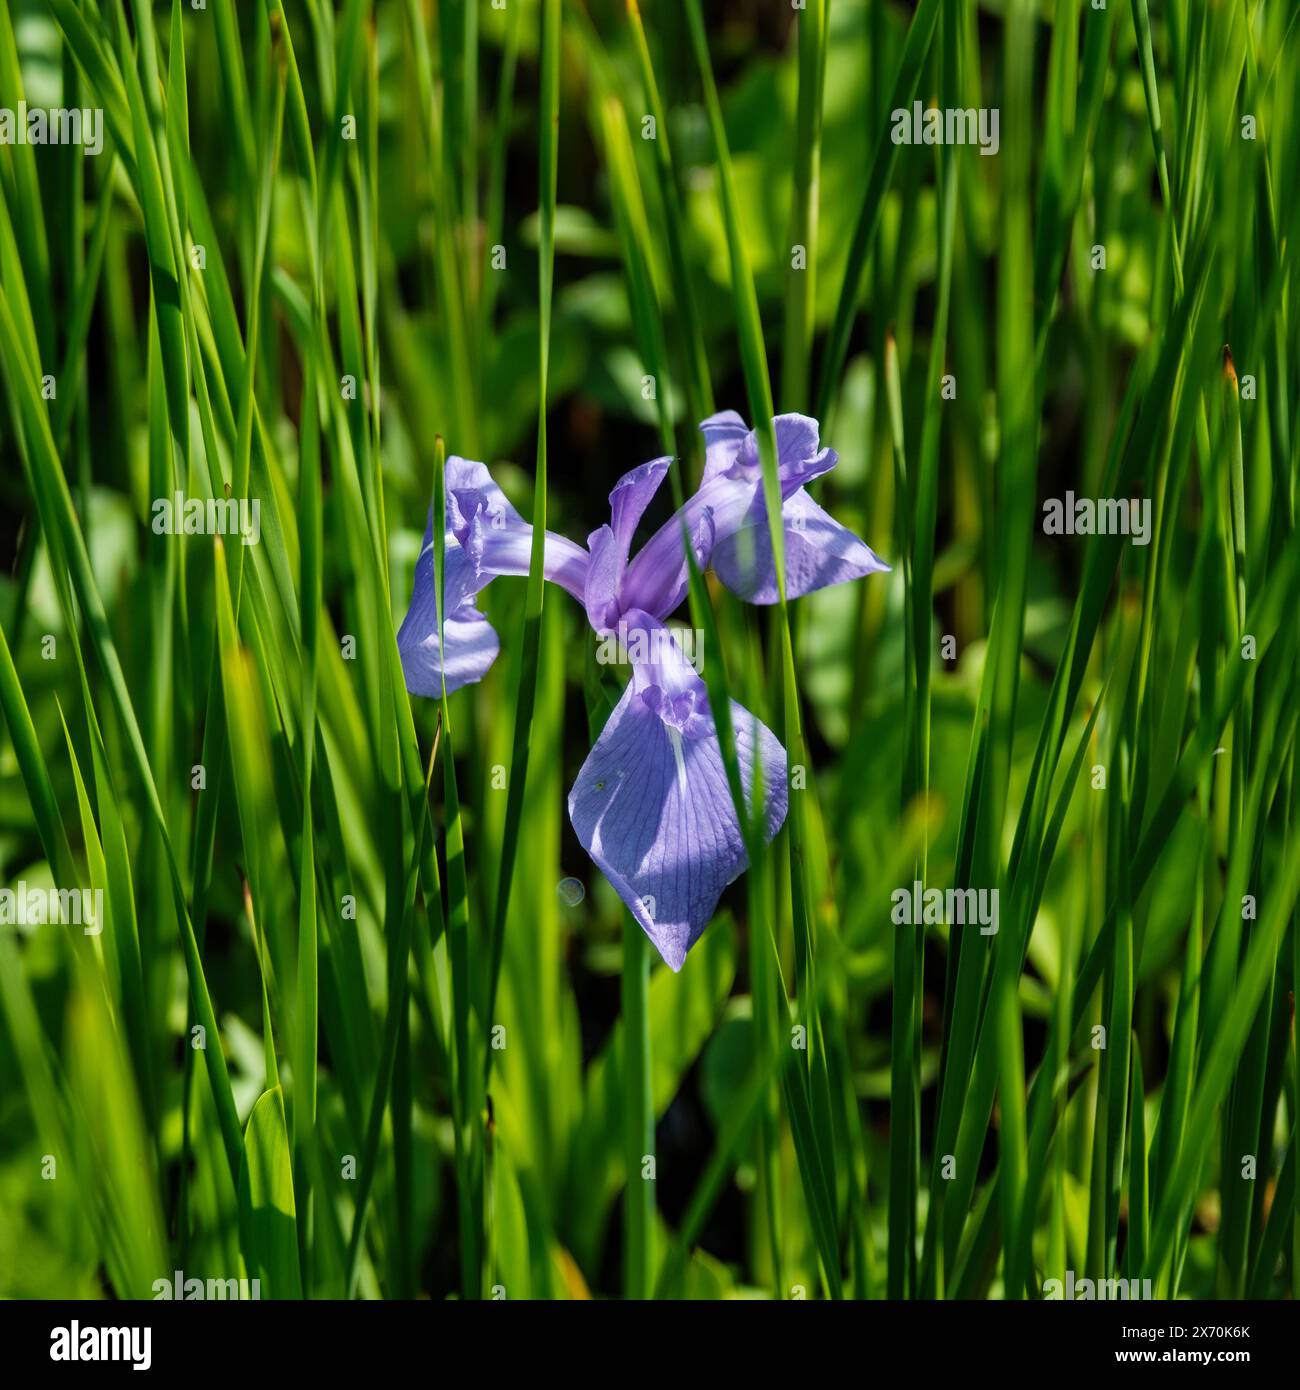 Japanese iris flower growing amongst reeds at the edge of a pond in early spring Stock Photo